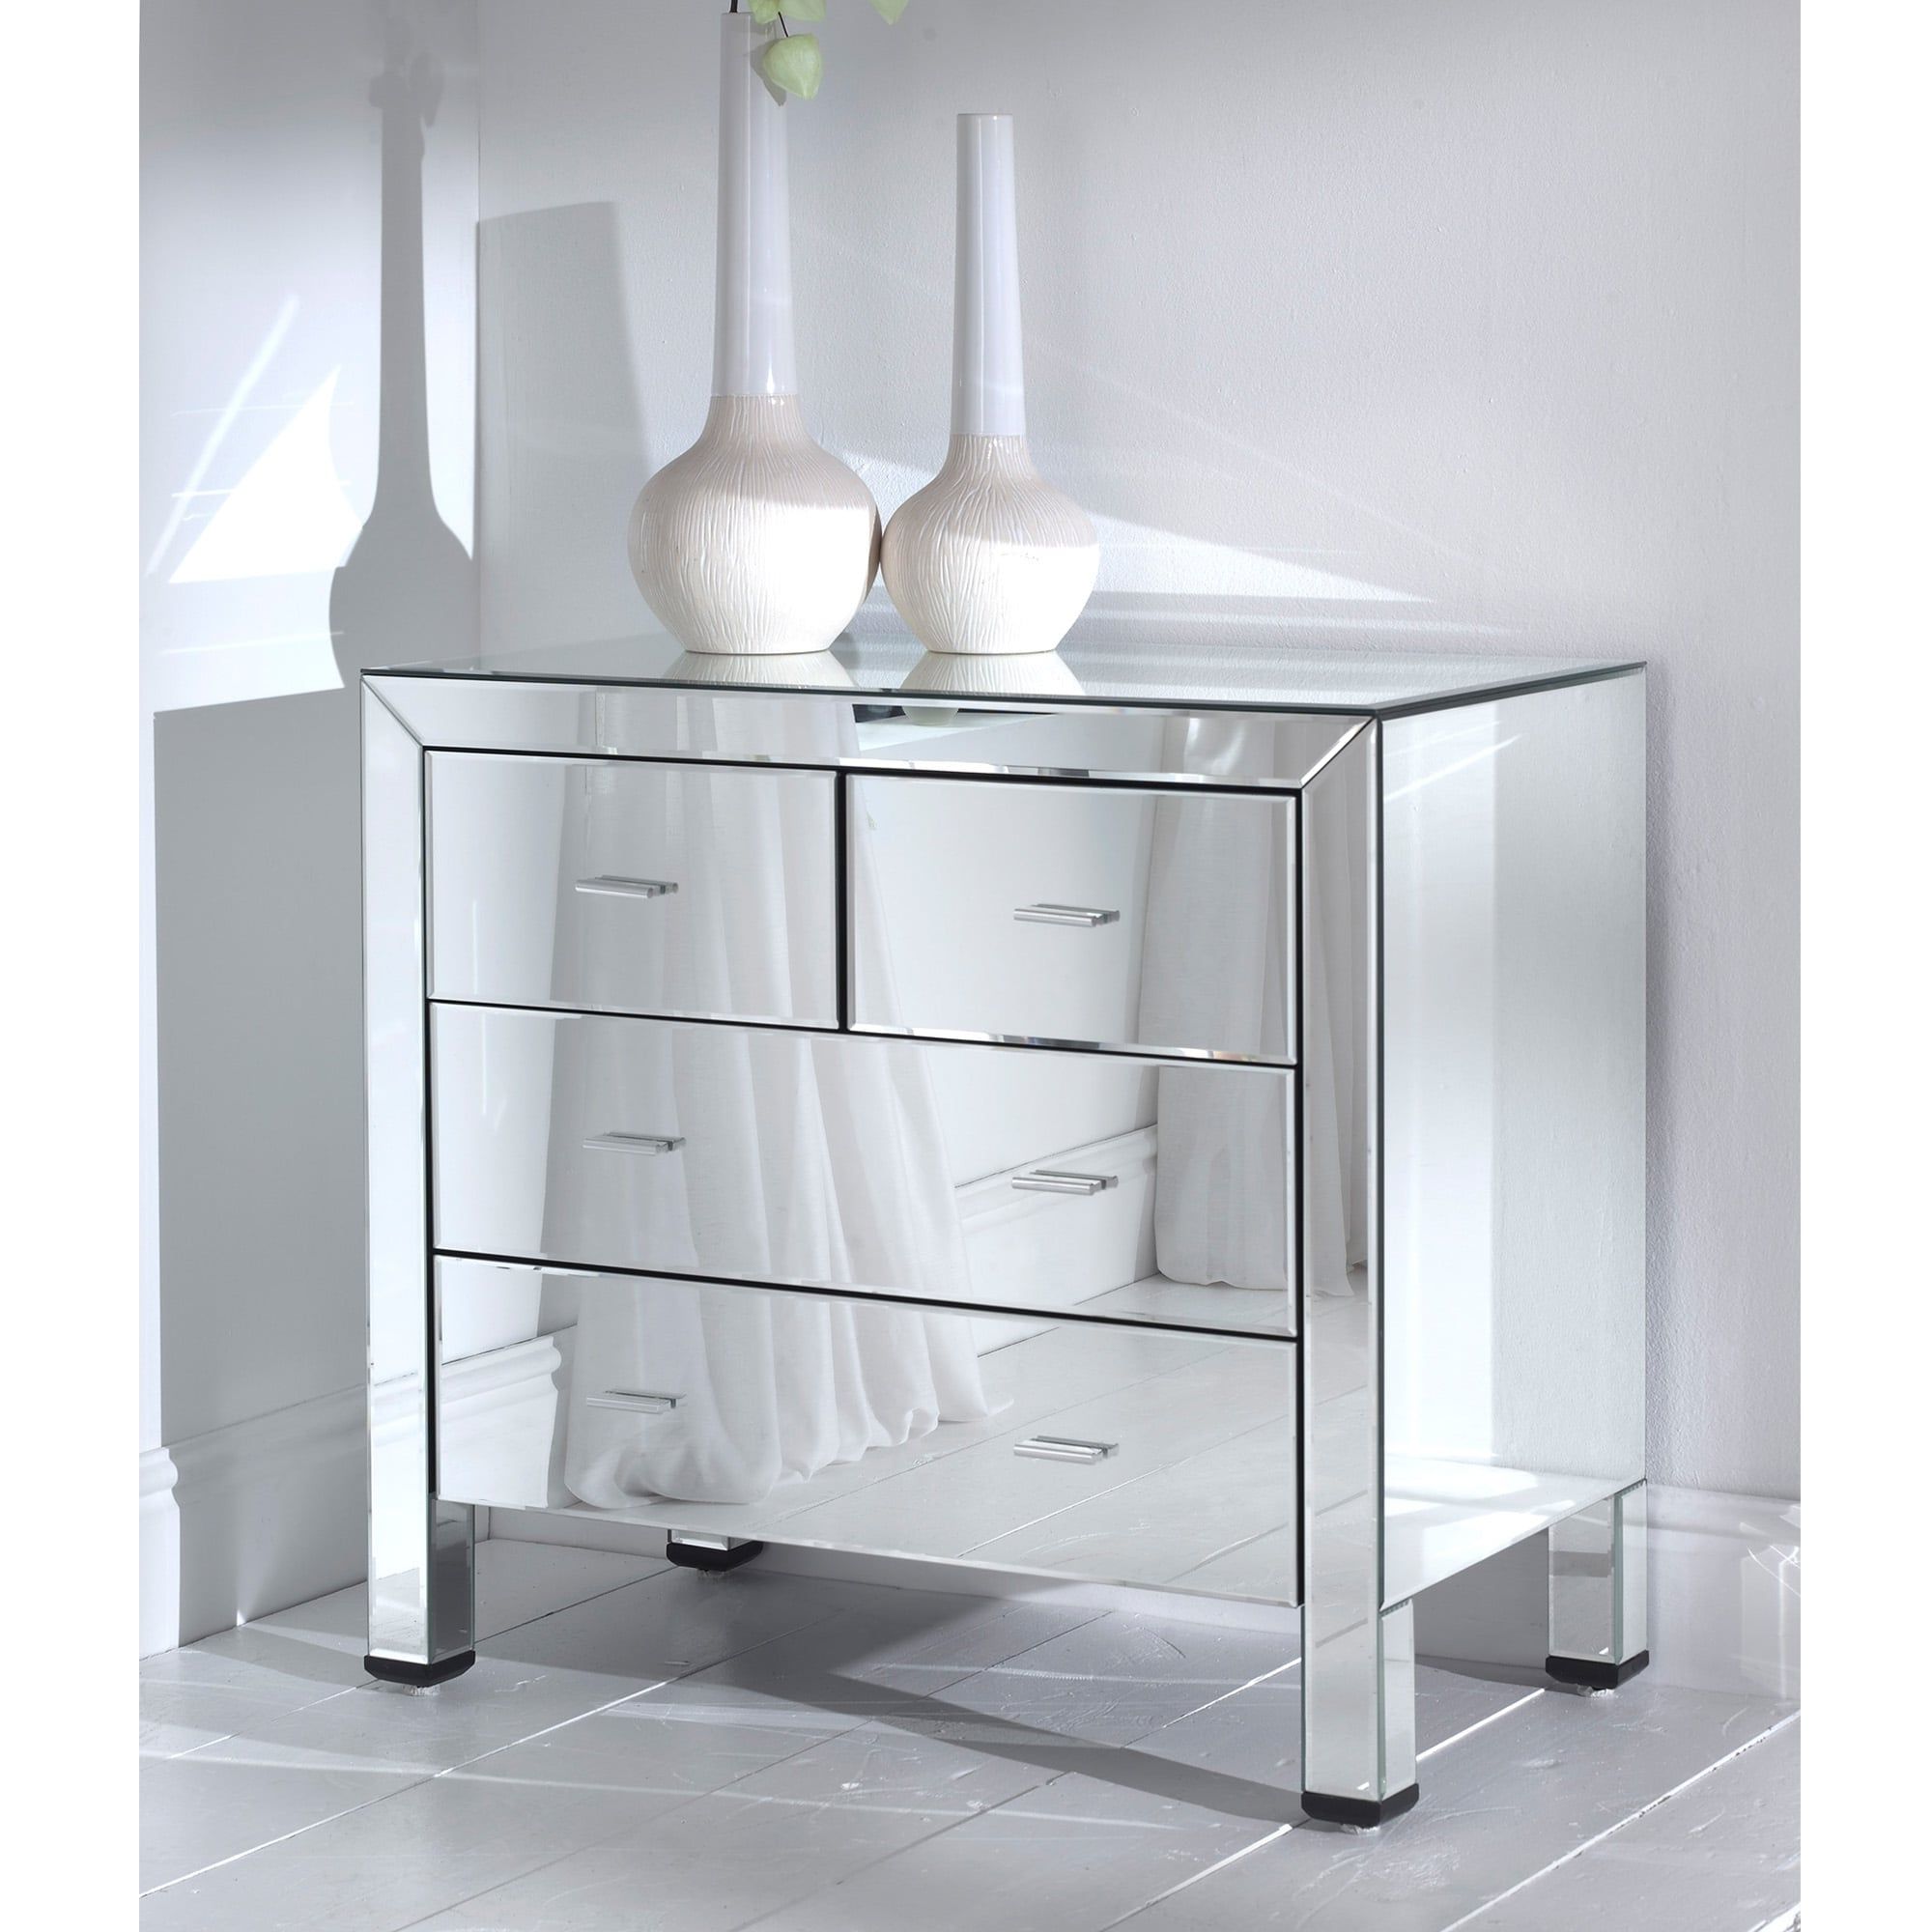 Romano Mirrored Chest 4 Drawer | Bedroom Chest Of Drawers | Mirrored | With Regard To Romano Mirrored Wardrobes (Gallery 8 of 20)